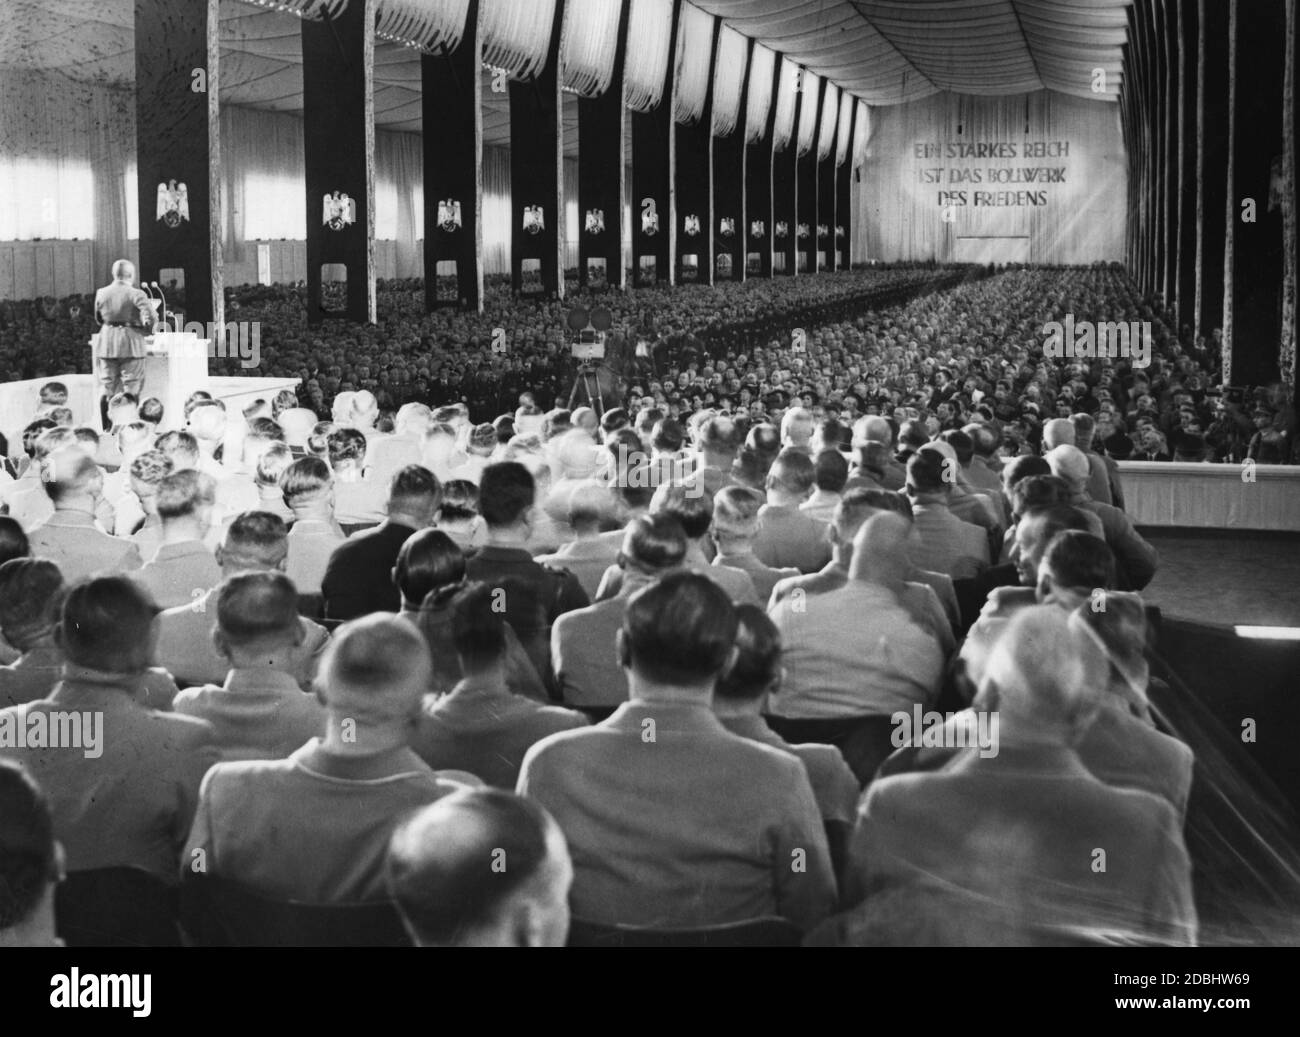 'Gauleiter Julius Streicher gives a speech at the opening of the Nuremberg Rally in the Luitpoldhalle on the Nazi Party Rally Grounds. On the opposite wall is written the slogan: ''A strong Reich is the bulwark of peace''.' Stock Photo